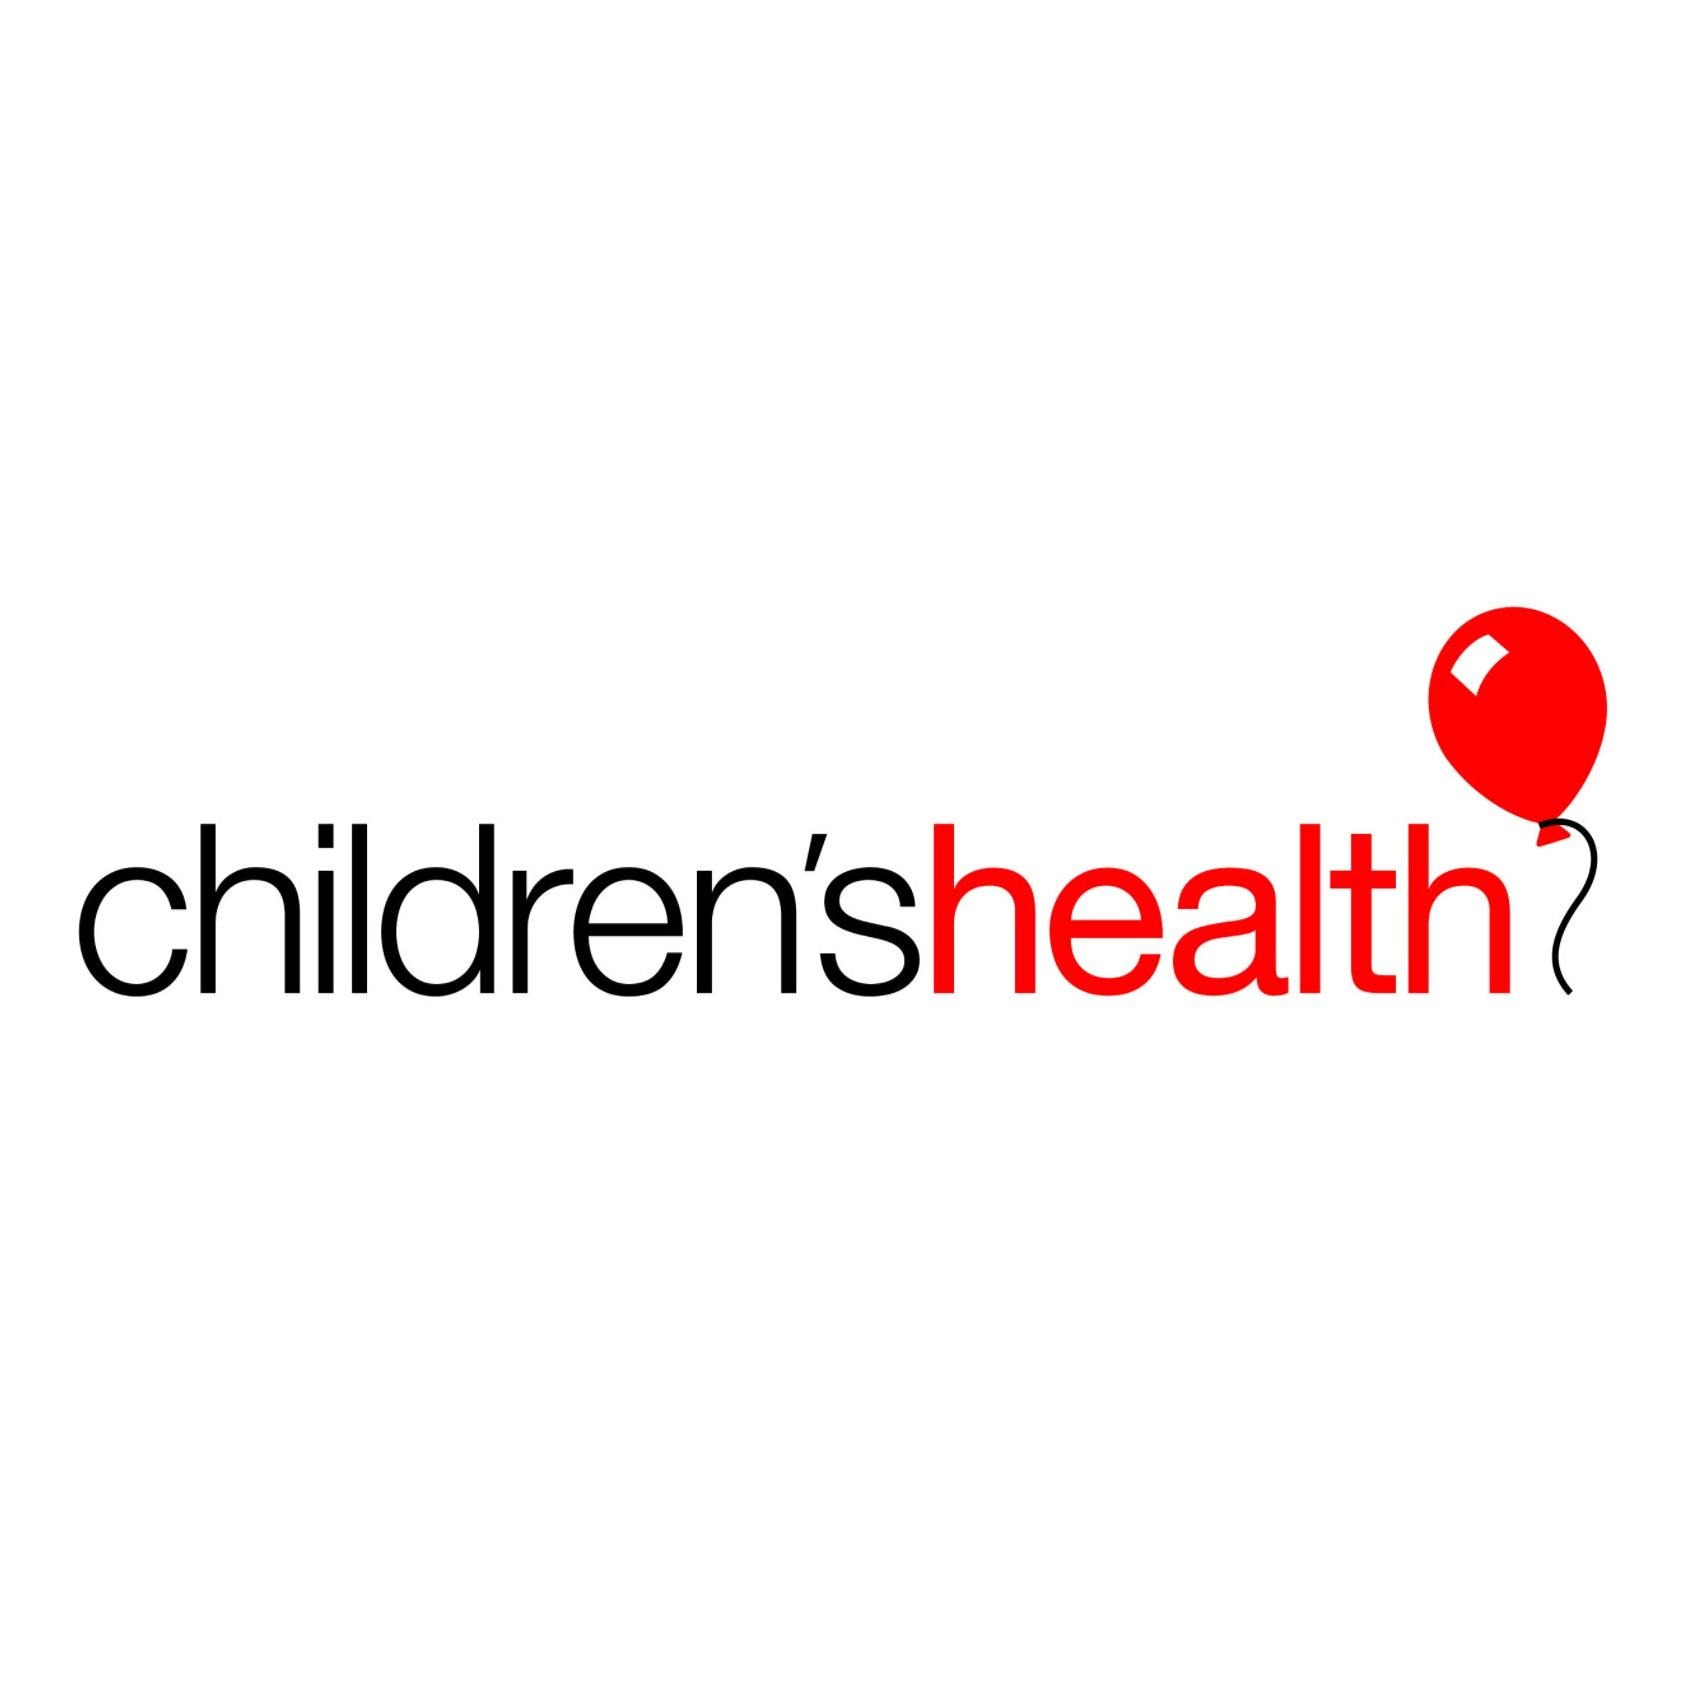 Children’s Health Redesigns, Launches On-Site Search Function to Create Best-In-Class Website - Logo - https://s39939.pcdn.co/wp-content/uploads/2020/06/Childrens-Health_Website.jpg